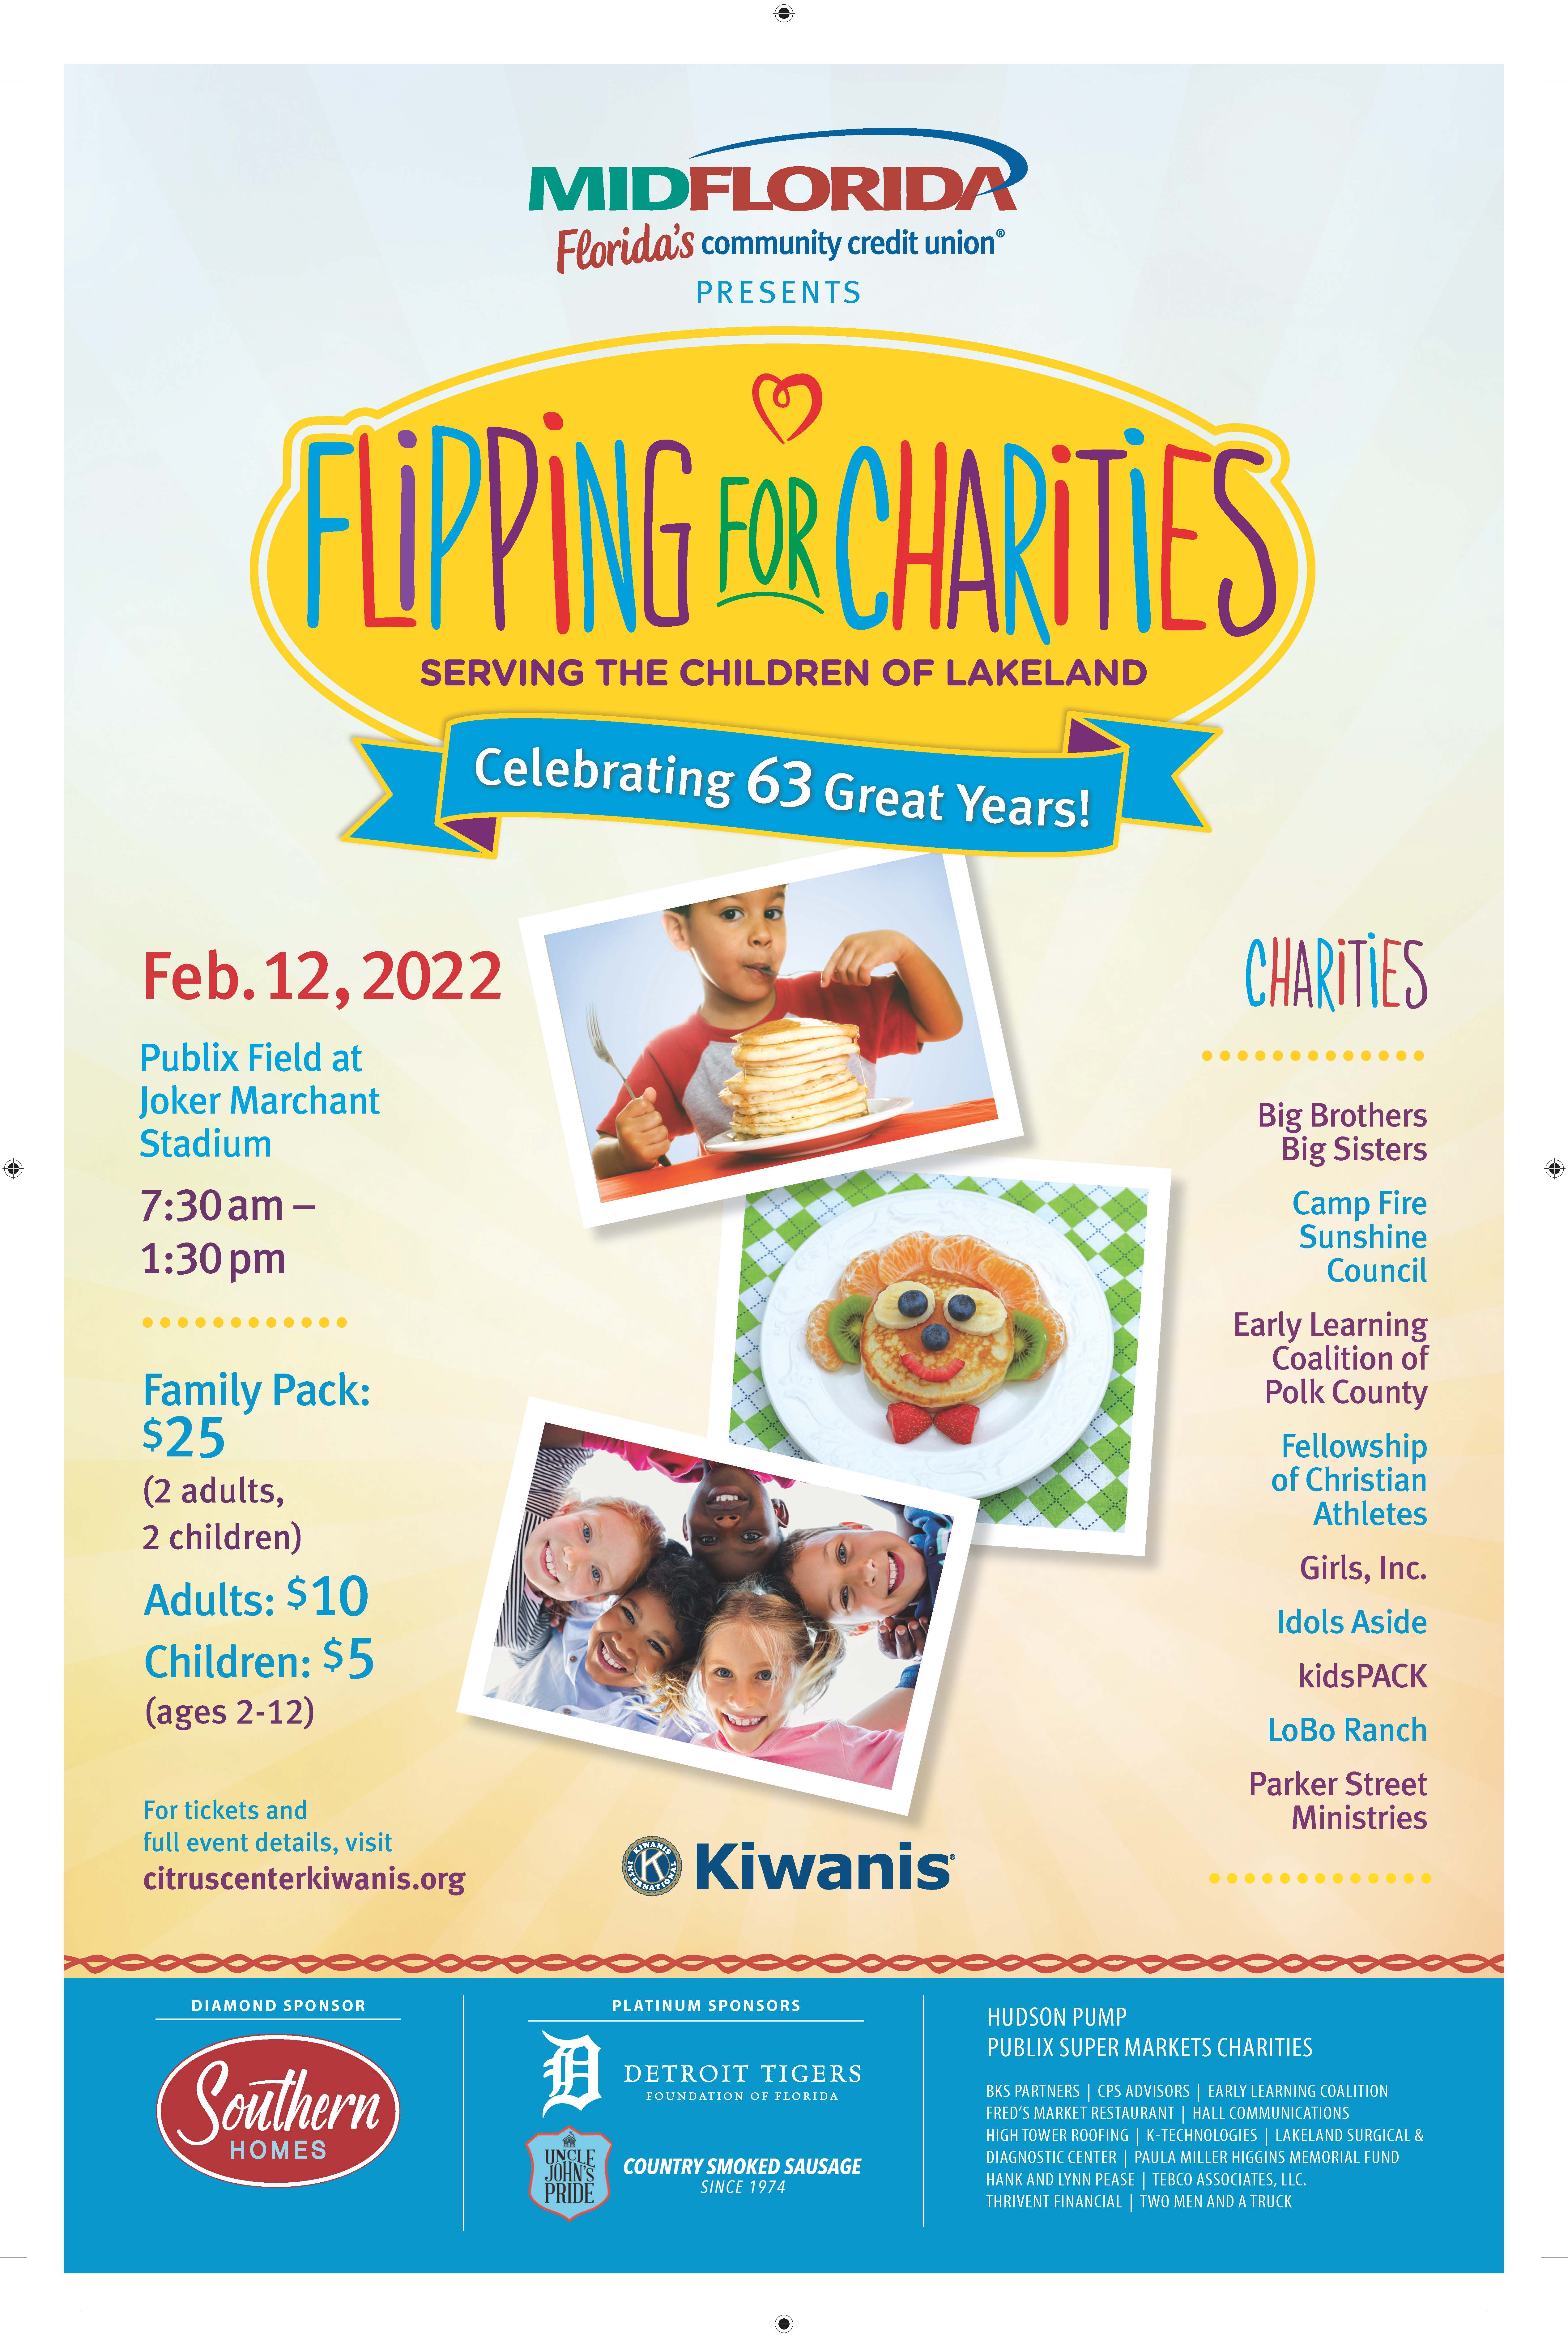 flipping for charities, serving the children of lakeland. celebrating 63 great years.  2-12-22 at publix joker marchant field, 7:30a-1:30p.  family pack $25 2 adults/2kids.  adults $10, kids 2-12, $5.for tickets and event details, citruscenterkiwanis.org.  charities: big bro and big sis, campfire sunshine council, early coalition of polk county, fca, girls inc, idols aside, kidspack, lobo ranch, parker street ministries.  